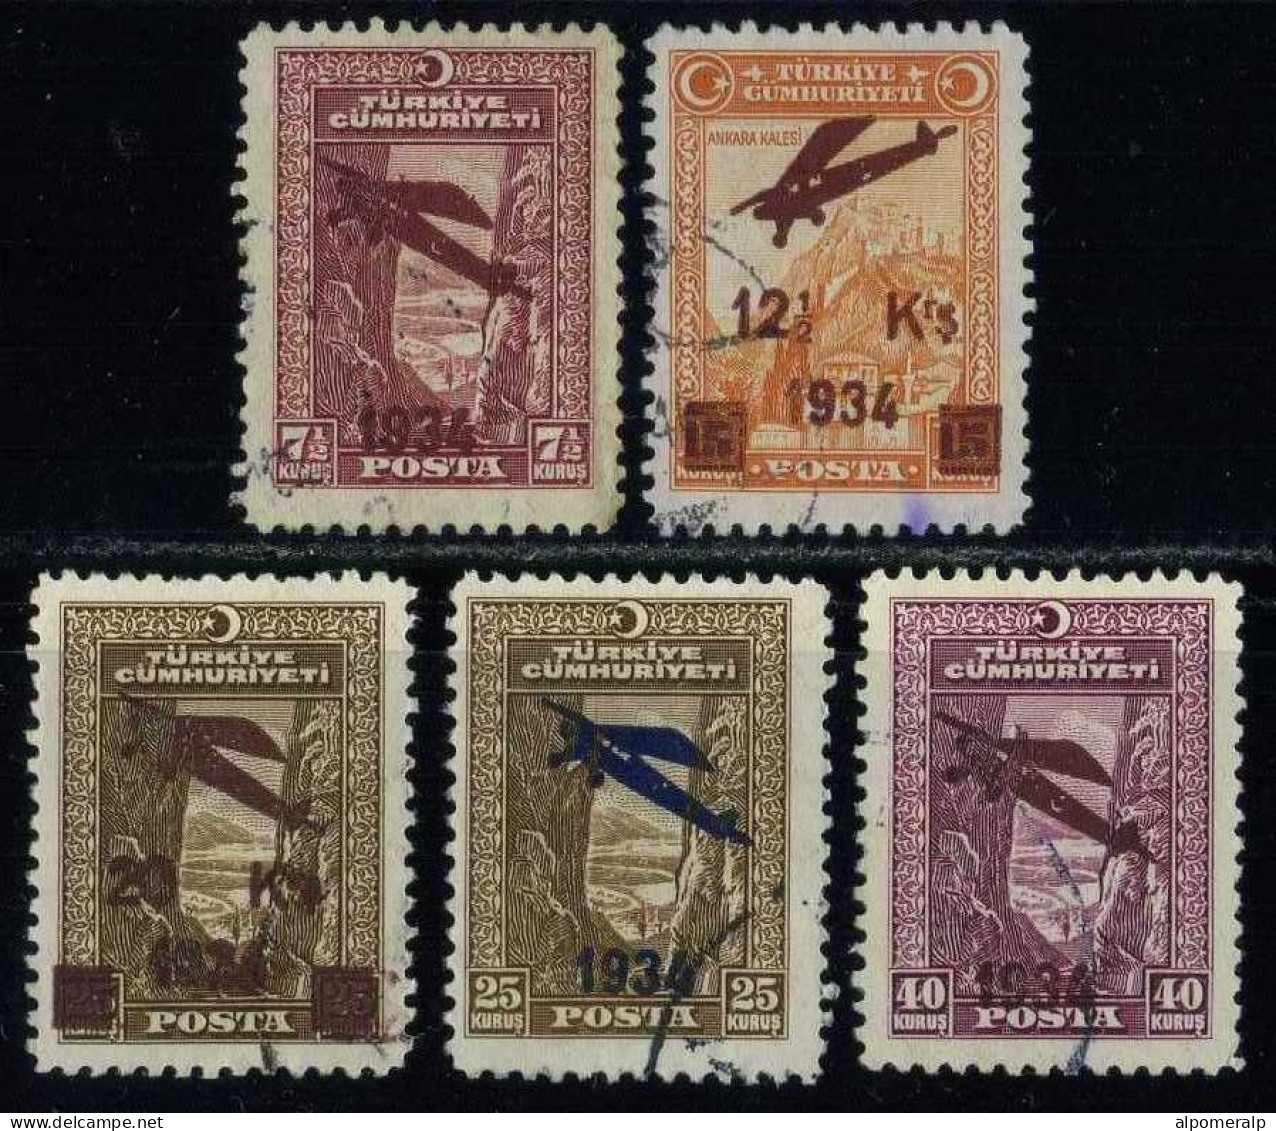 Türkiye 1934 Mi 980-984 Airmail Stamps First Issue, Opening Of The Ankara-Istanbul Airmail Line - Oblitérés